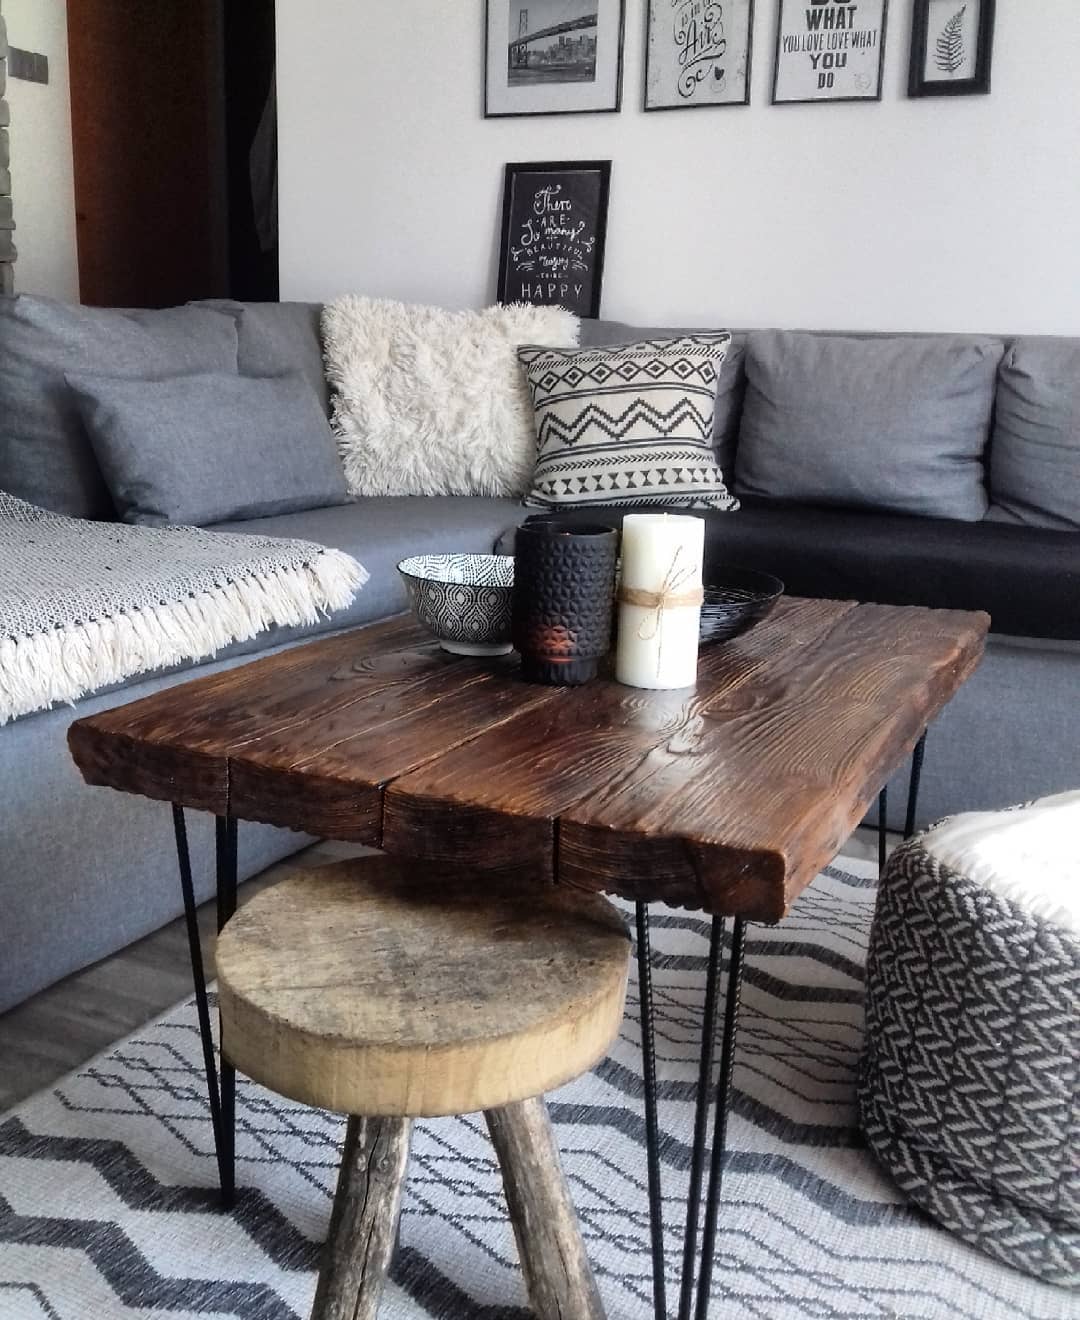 Wooden coffee table in living room. Photo by Instagram user @tanja_home